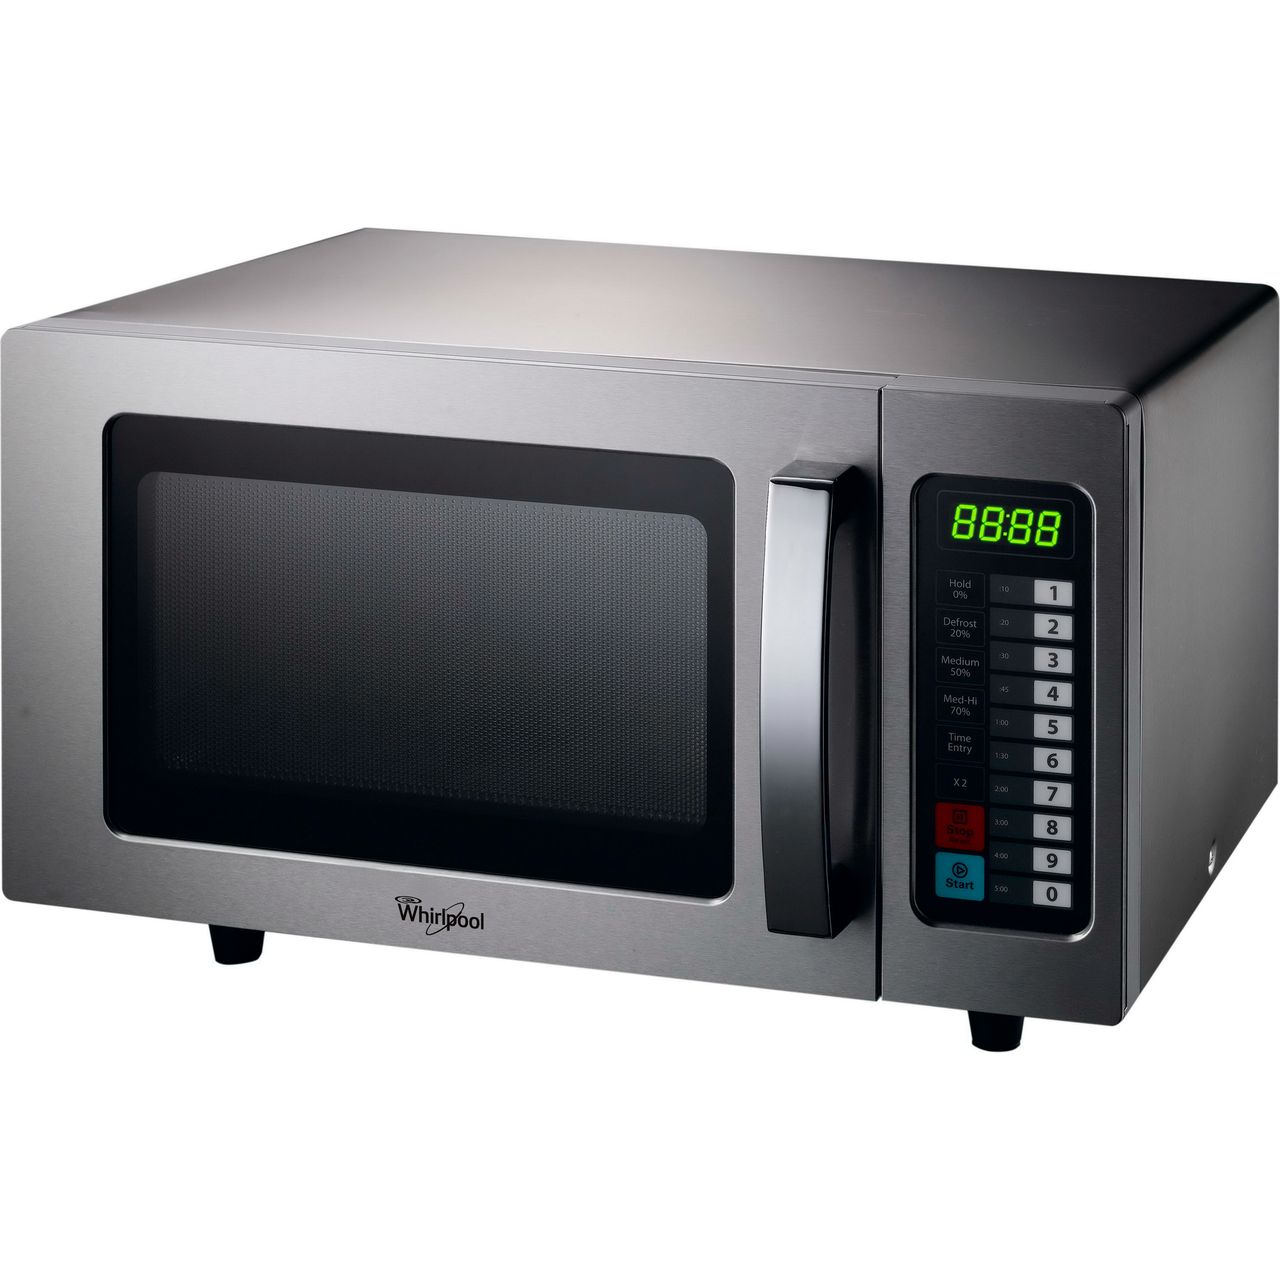 Whirlpool PRO25IX 25 Litre Commercial Microwave Review